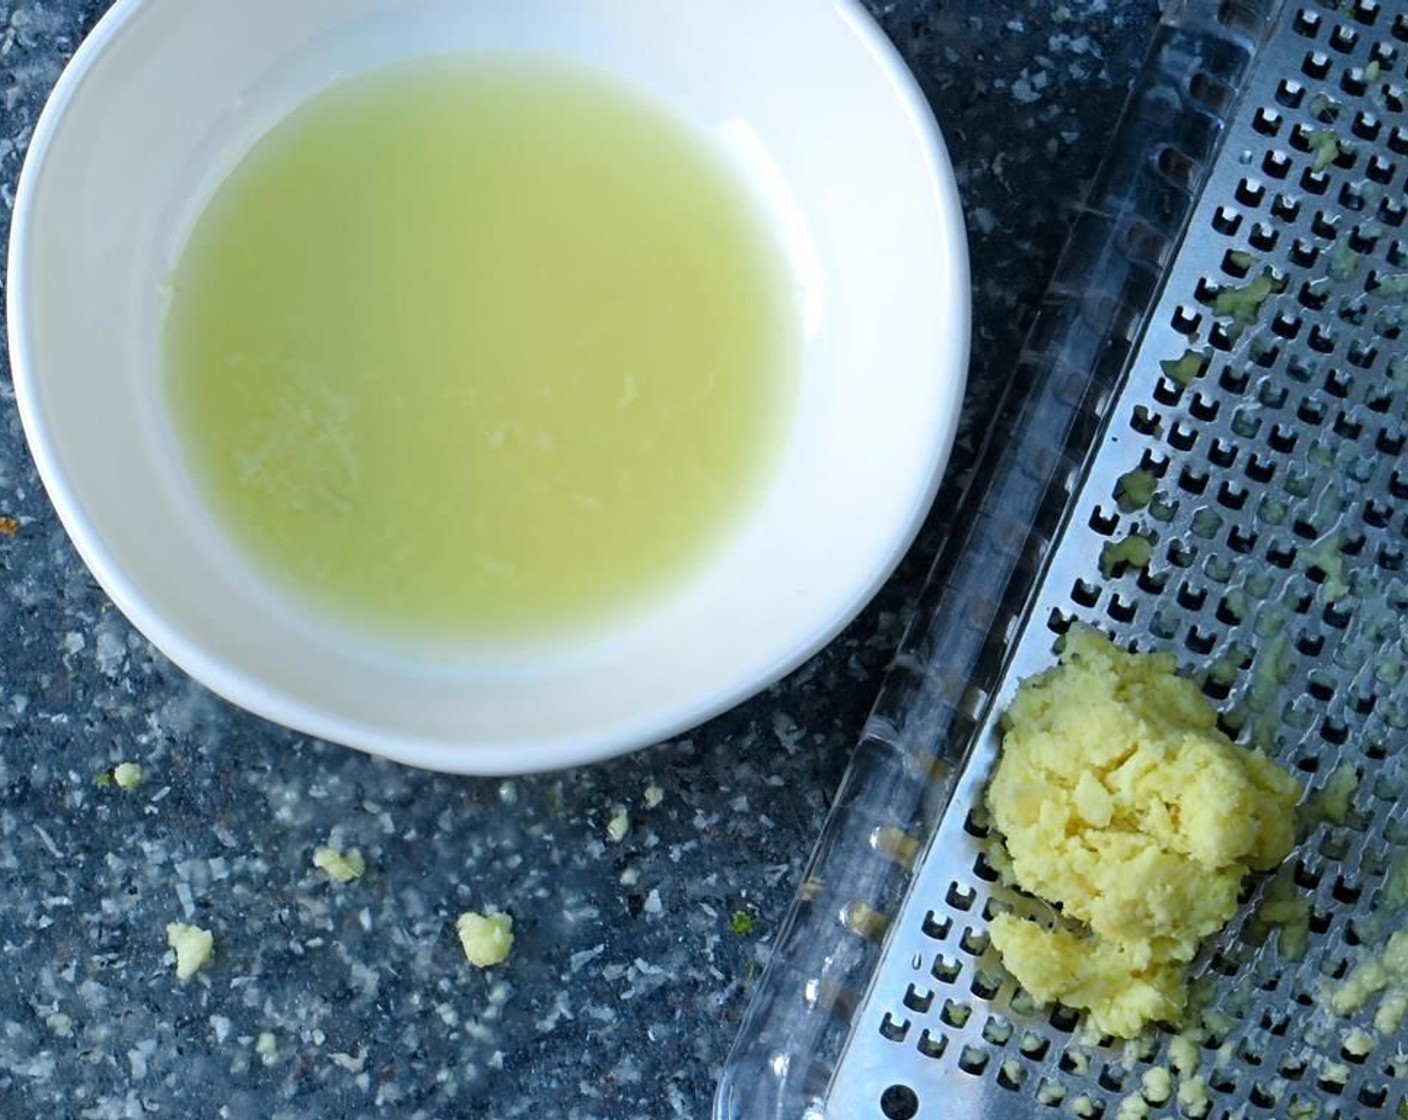 step 10 Carefully scoop the ginger pulp into your hand or into a fine mesh sieve. Squeeze the pulp over a small bowl to capture all the ginger juice. Discard the ginger solids.